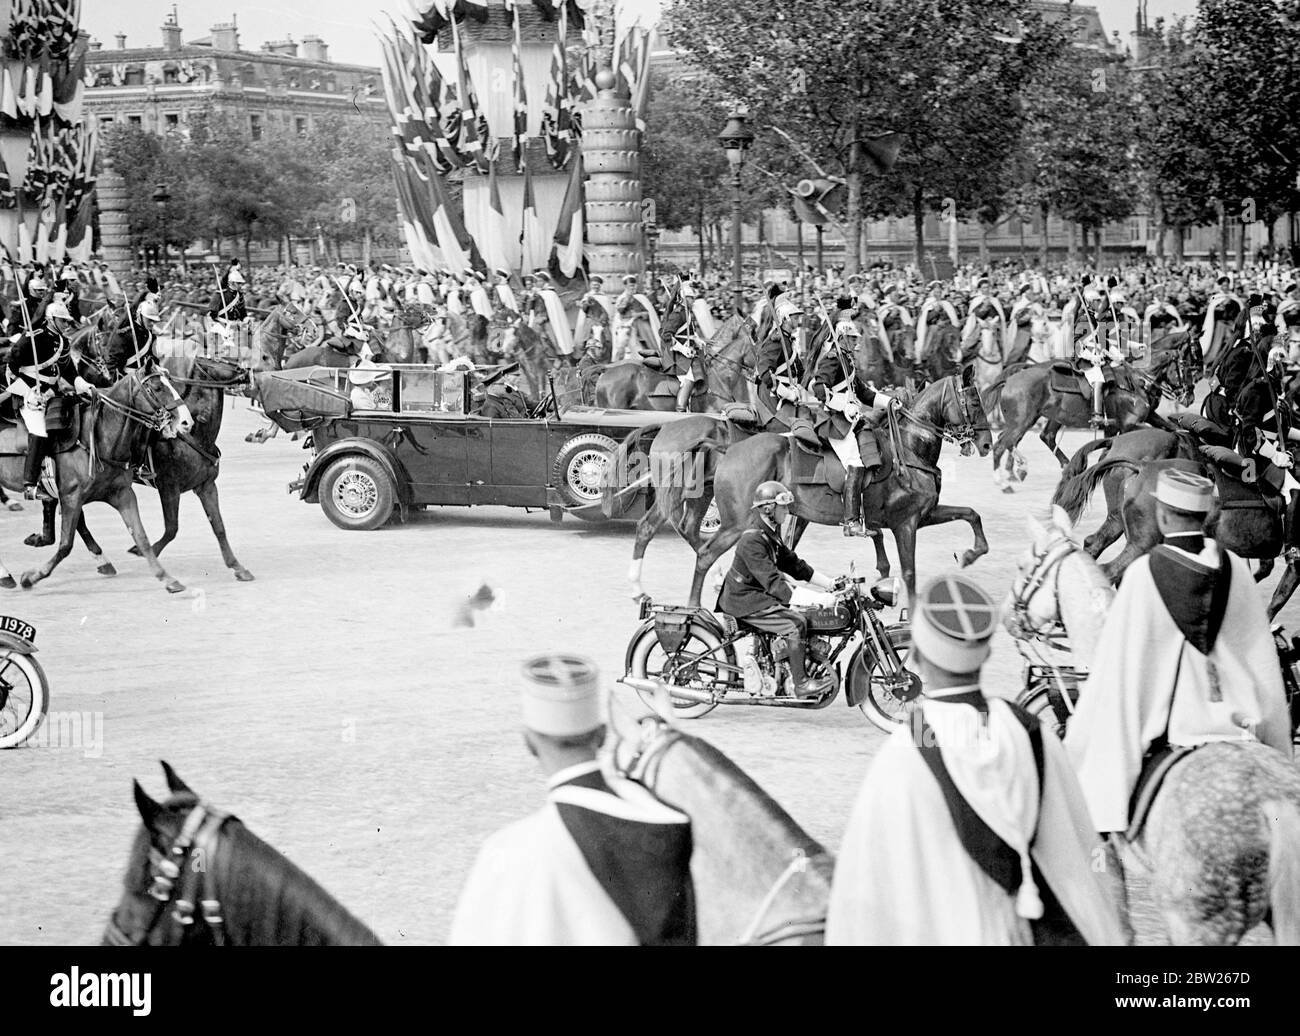 King and Queen receive tumultuous welcome in Paris. Welcomed by 1 million cheering people and the thunder of 101 gun salute, the King and Queen arrived at the Gare Bois de Boulogne on their State visit to Paris. Accompanied by President Lebrun of France and Mme Lebrun , they made the 4 mile drive through decorated streets lined with troops and crowds to the Qui d' Orsay Palace , where they are staying. Photo shows, the Queen driving through Paris with Mme Lebrun , escorted by cavalry and motorcyclists. 19 July 1938 Stock Photo